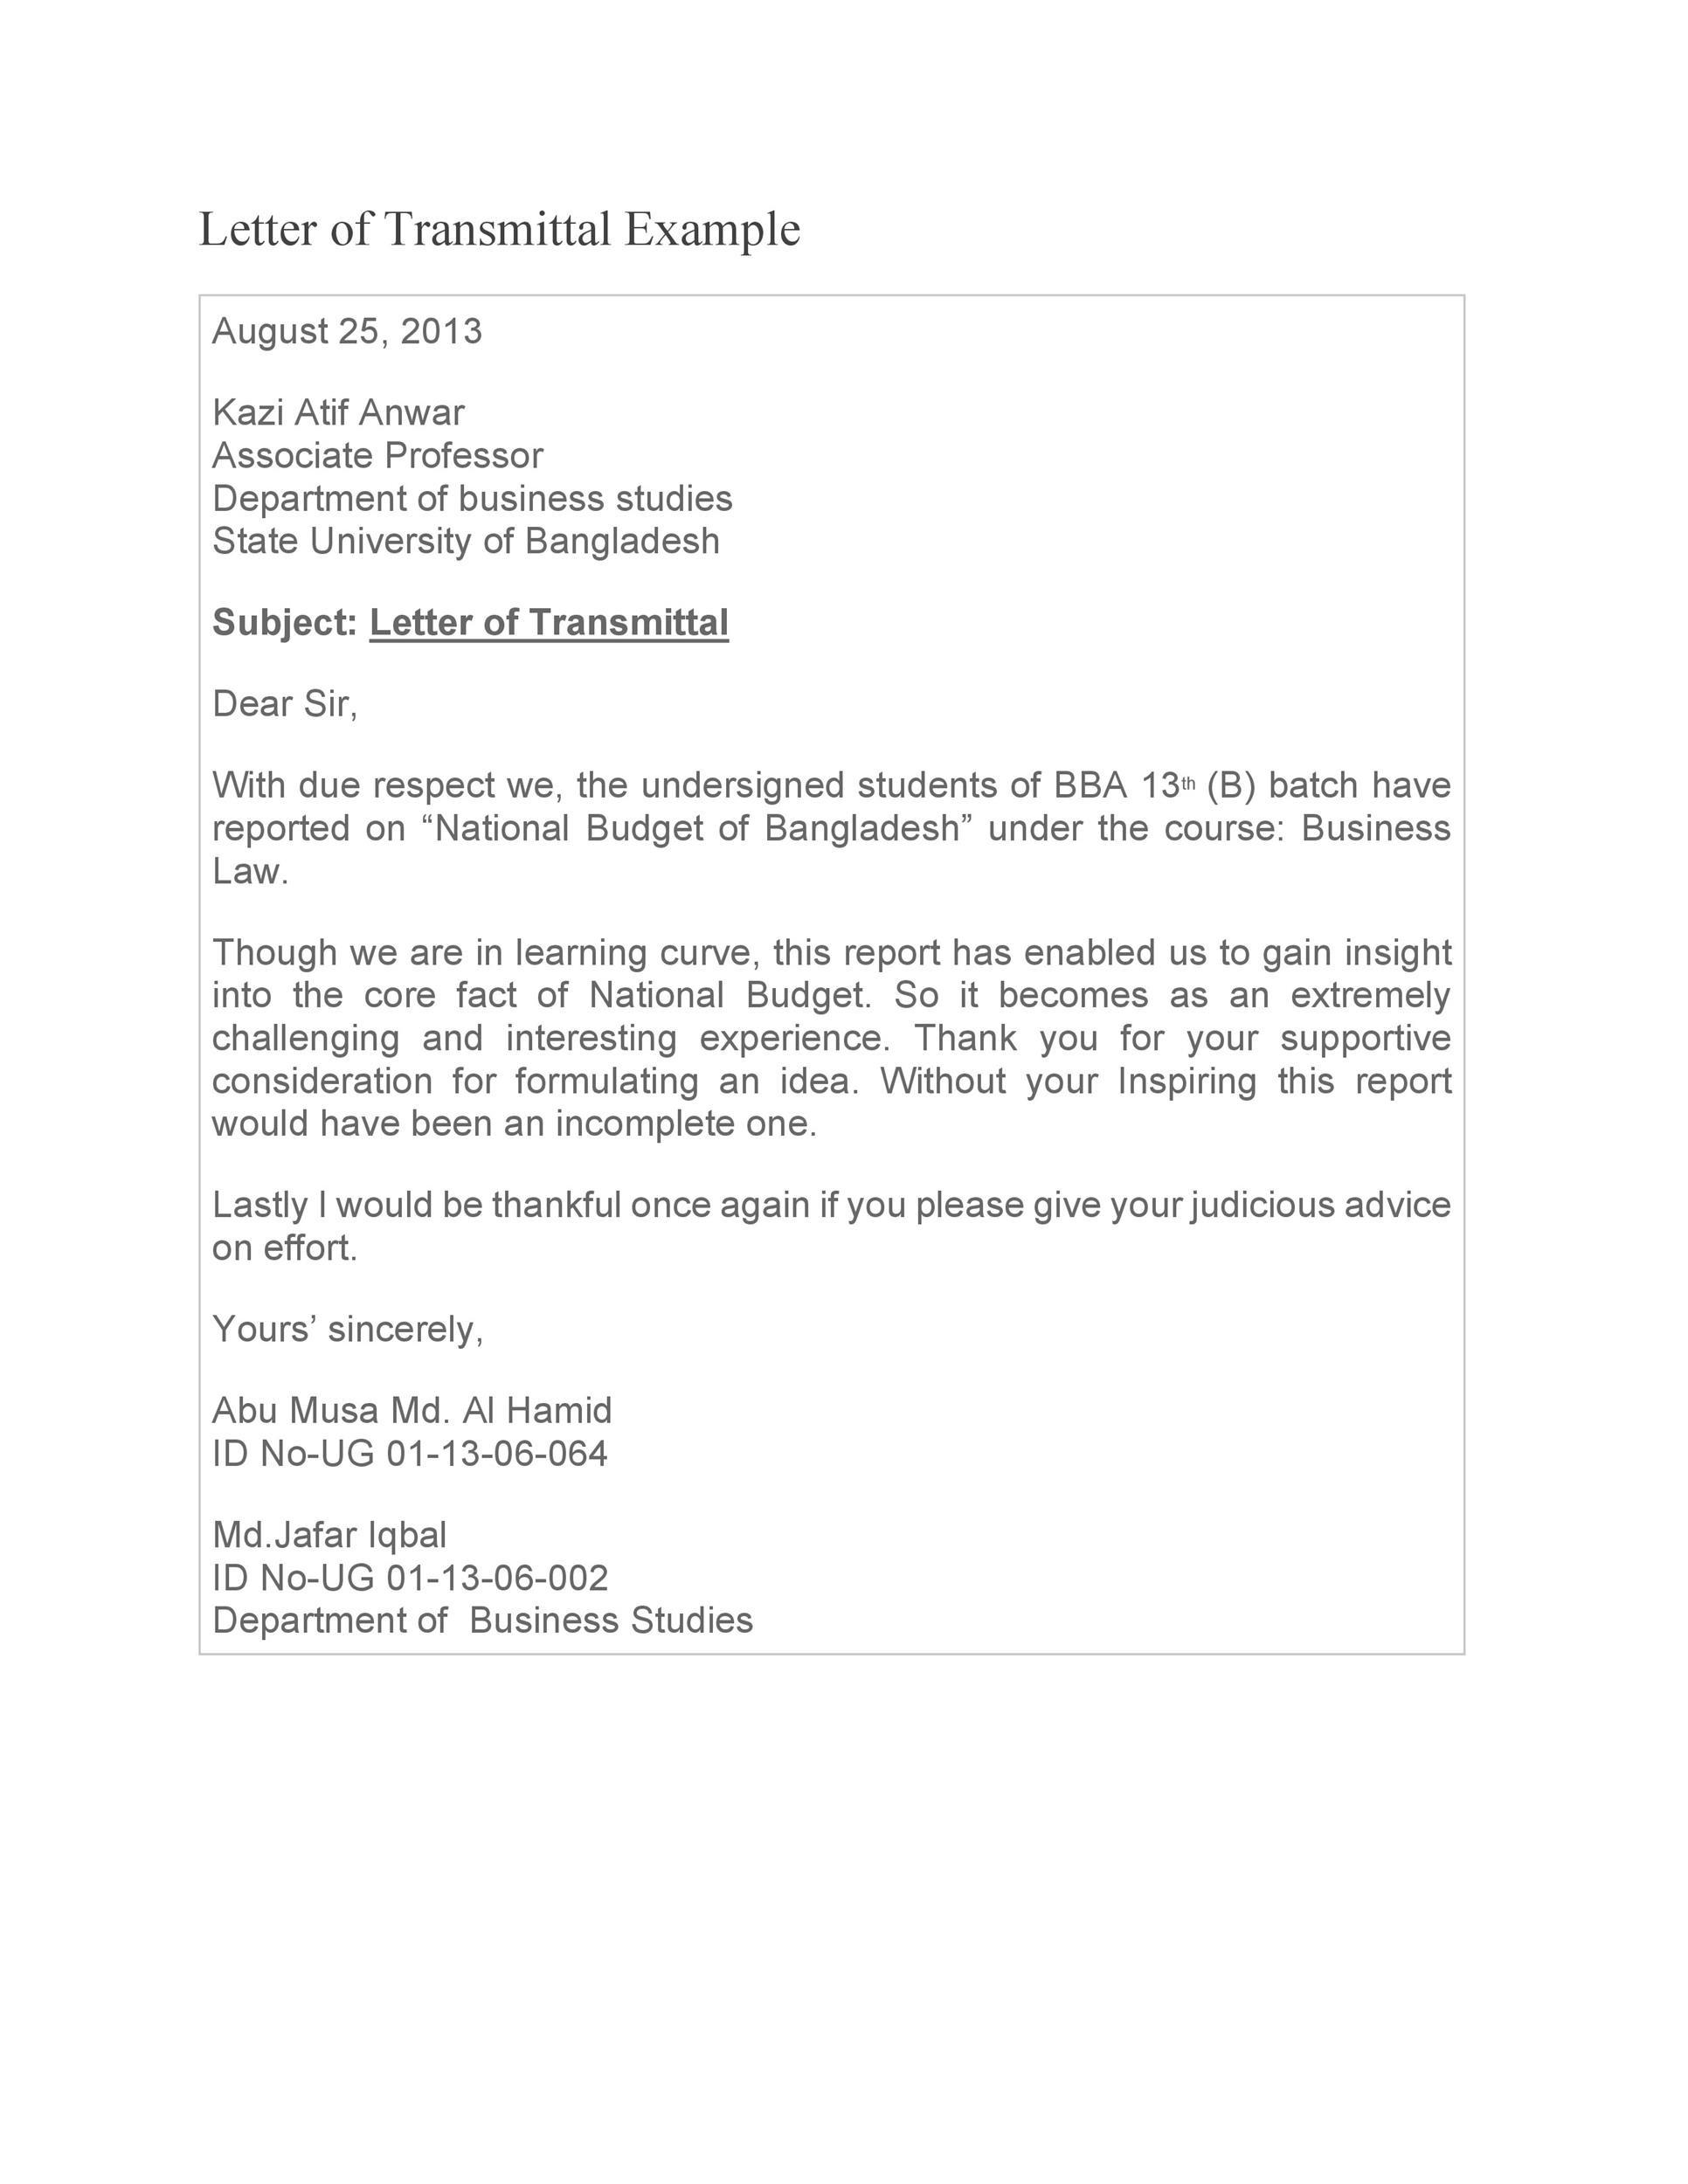 Letter of Transmittal 40+ Great Examples & Templates ᐅ TemplateLab